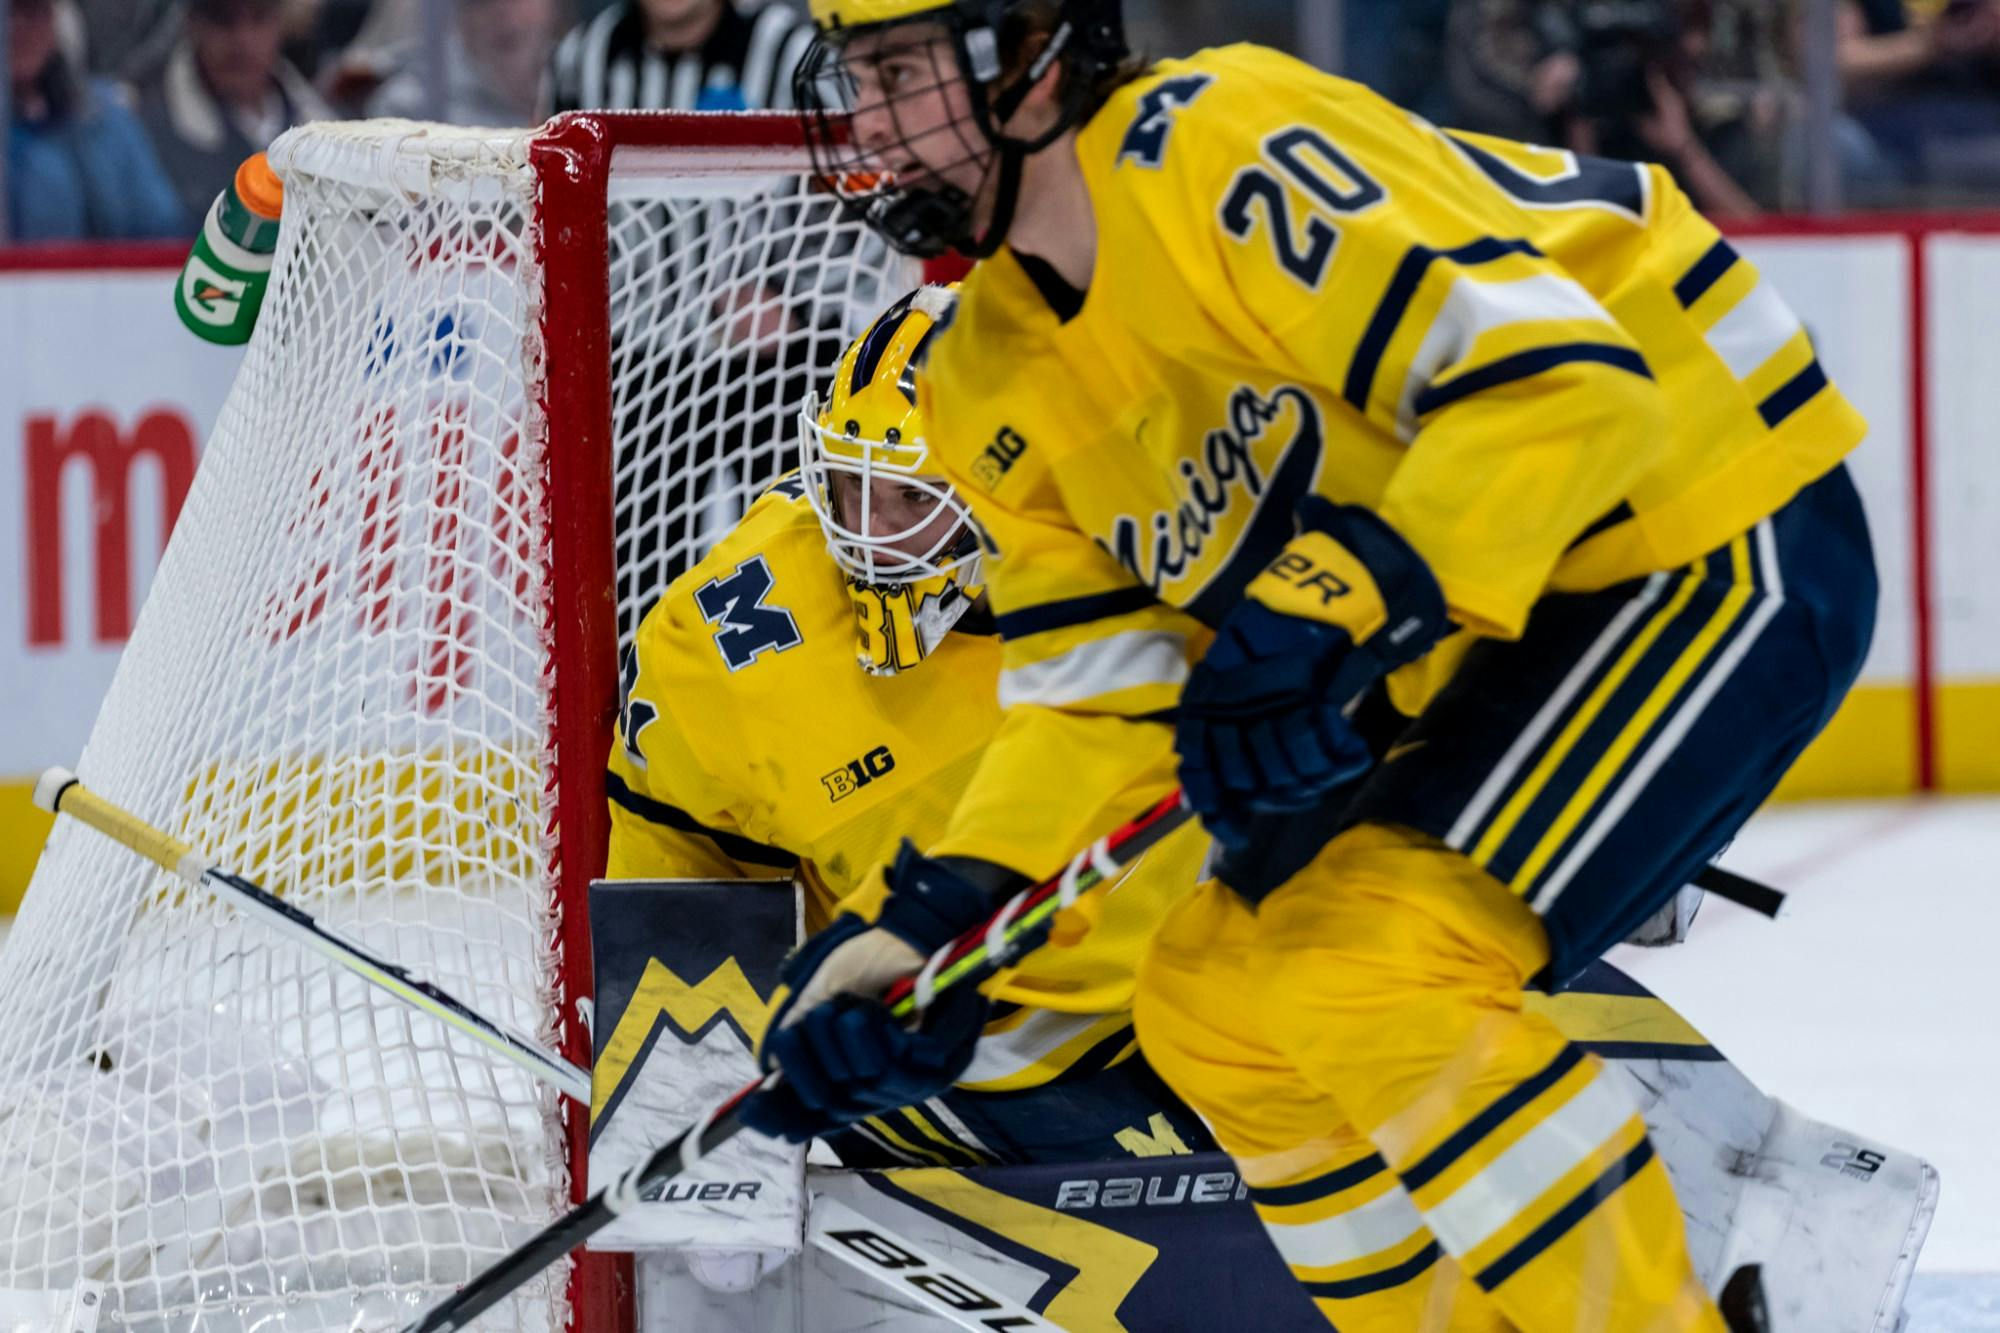 Michigan goaltender Strauss Mann (left) watches the puck in the corner. The Spartans fell to the Wolverines, 1-4, at Little Caesars Arena on February 17, 2020. 